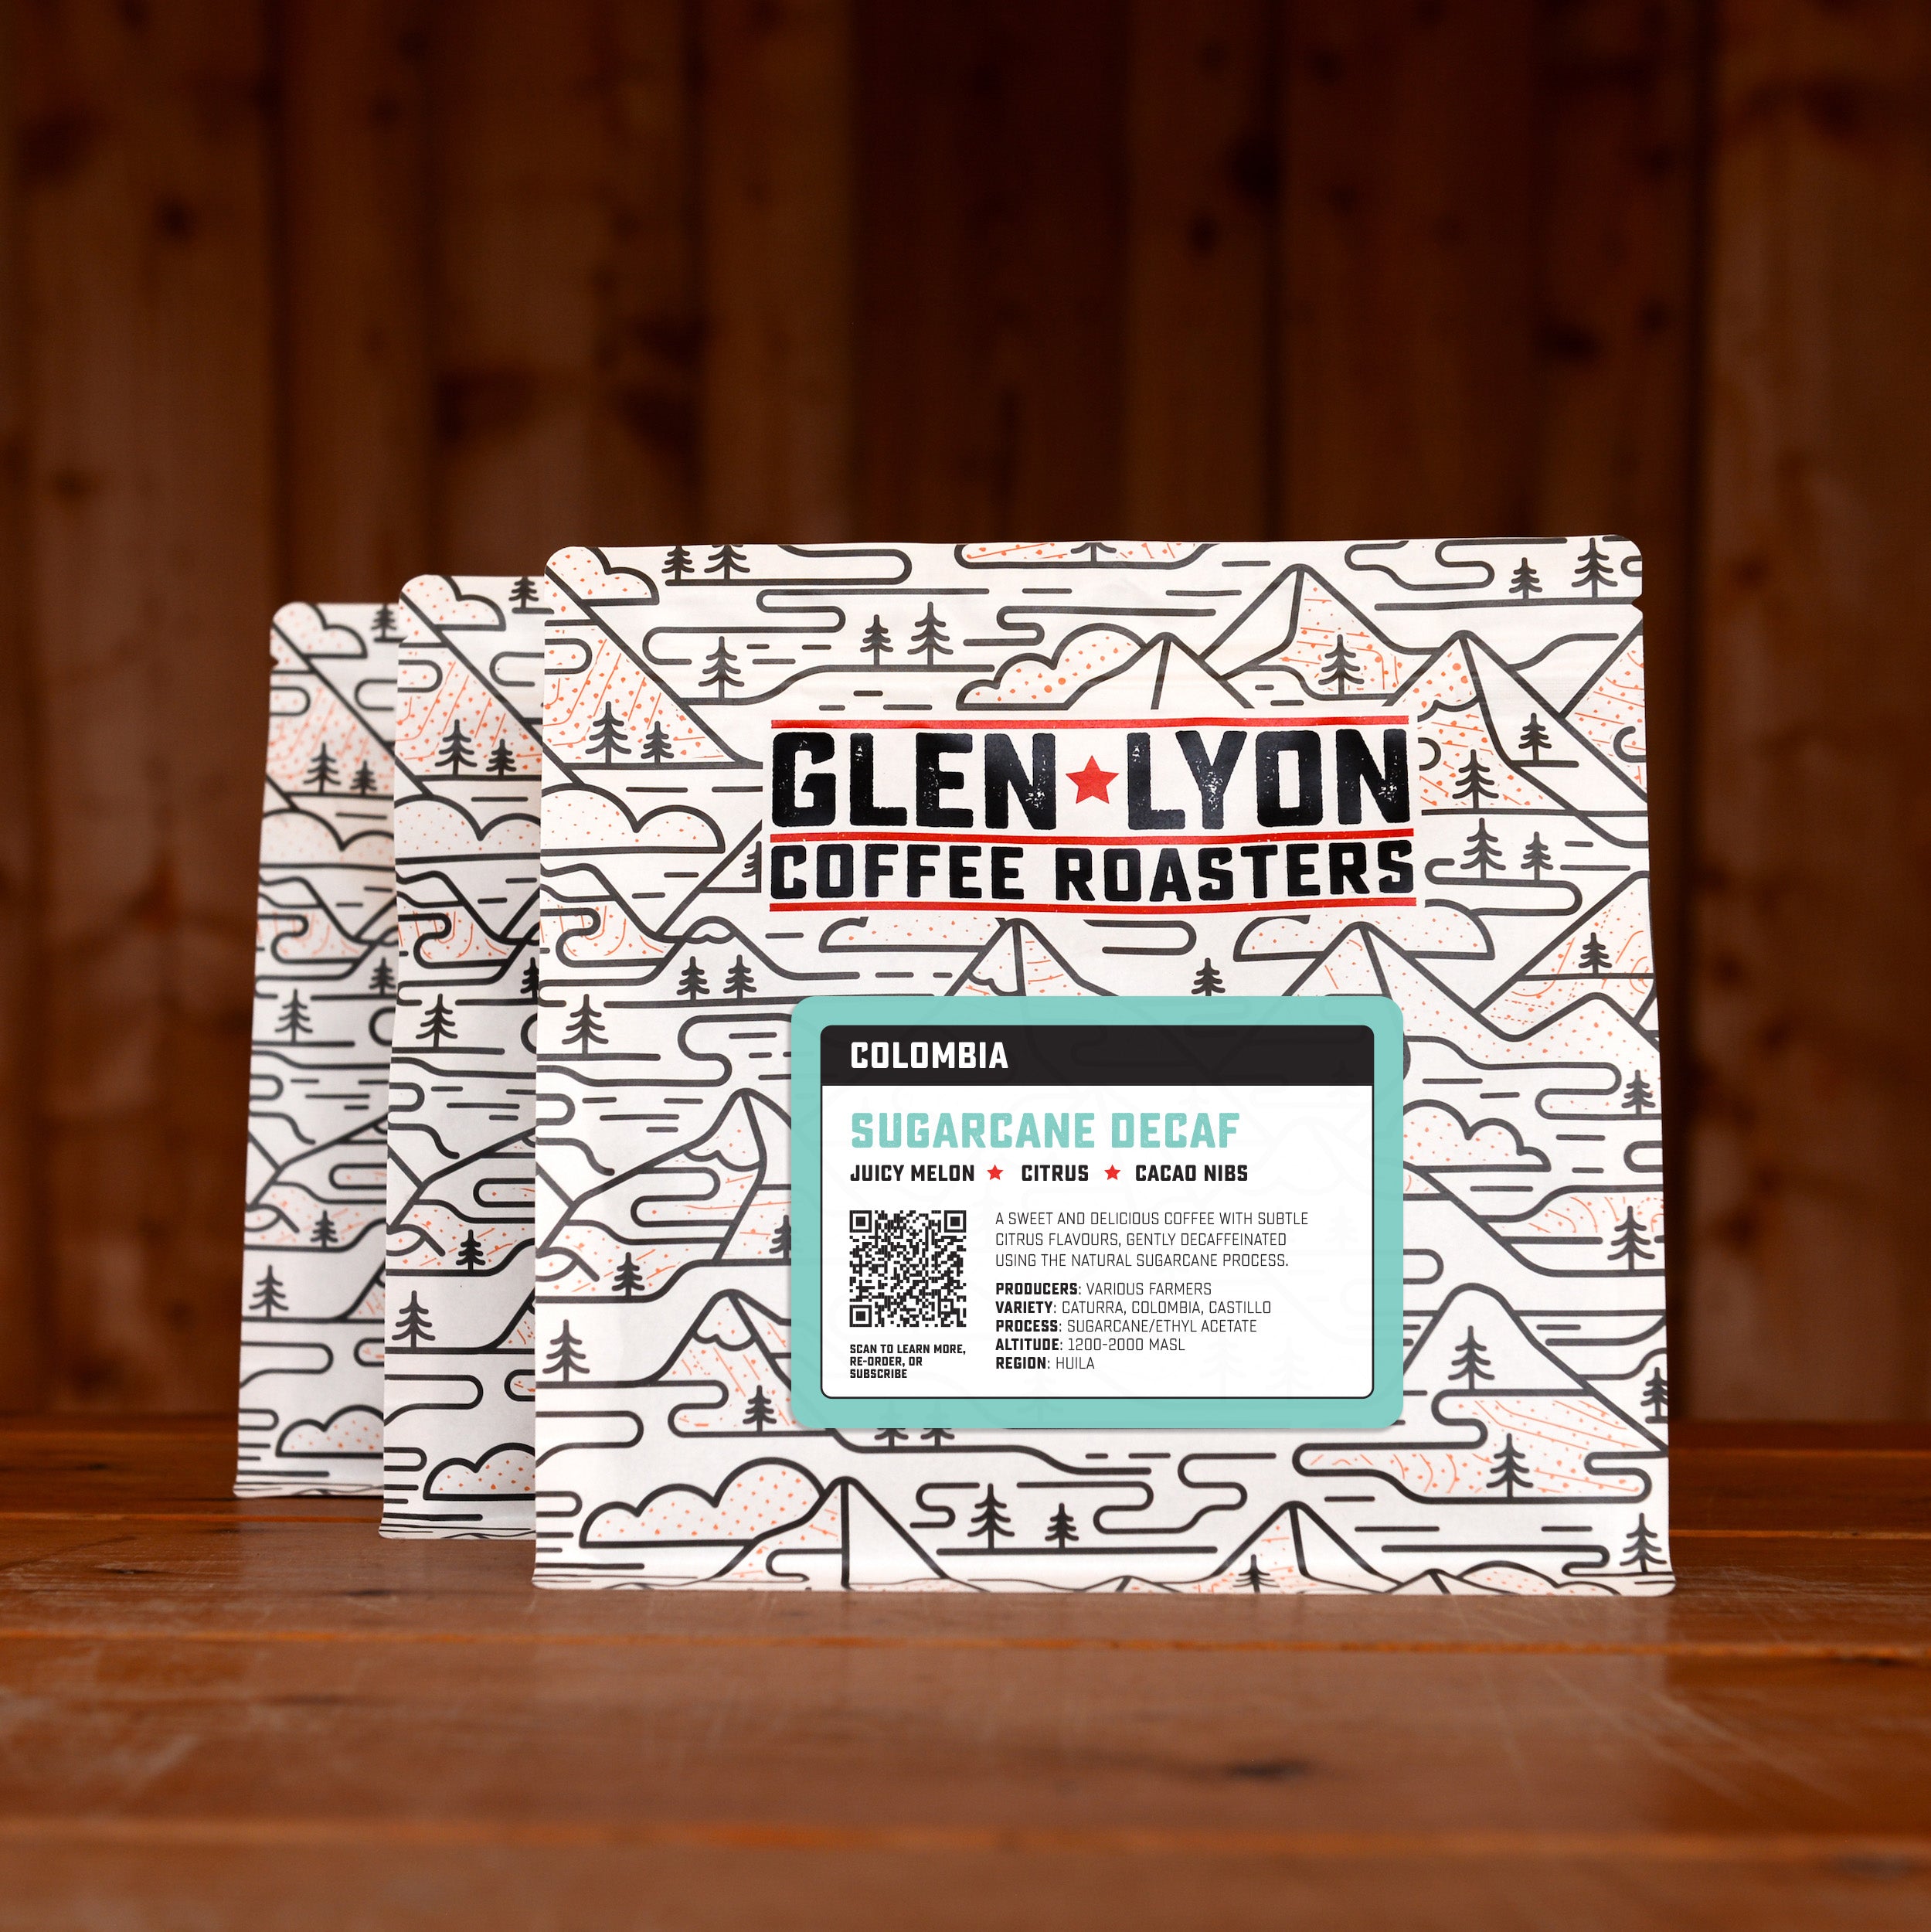 3 bags of Decaf subscription labelled speciality coffee from Glen Lyon Coffee Roasters against a warm wood-tinged background